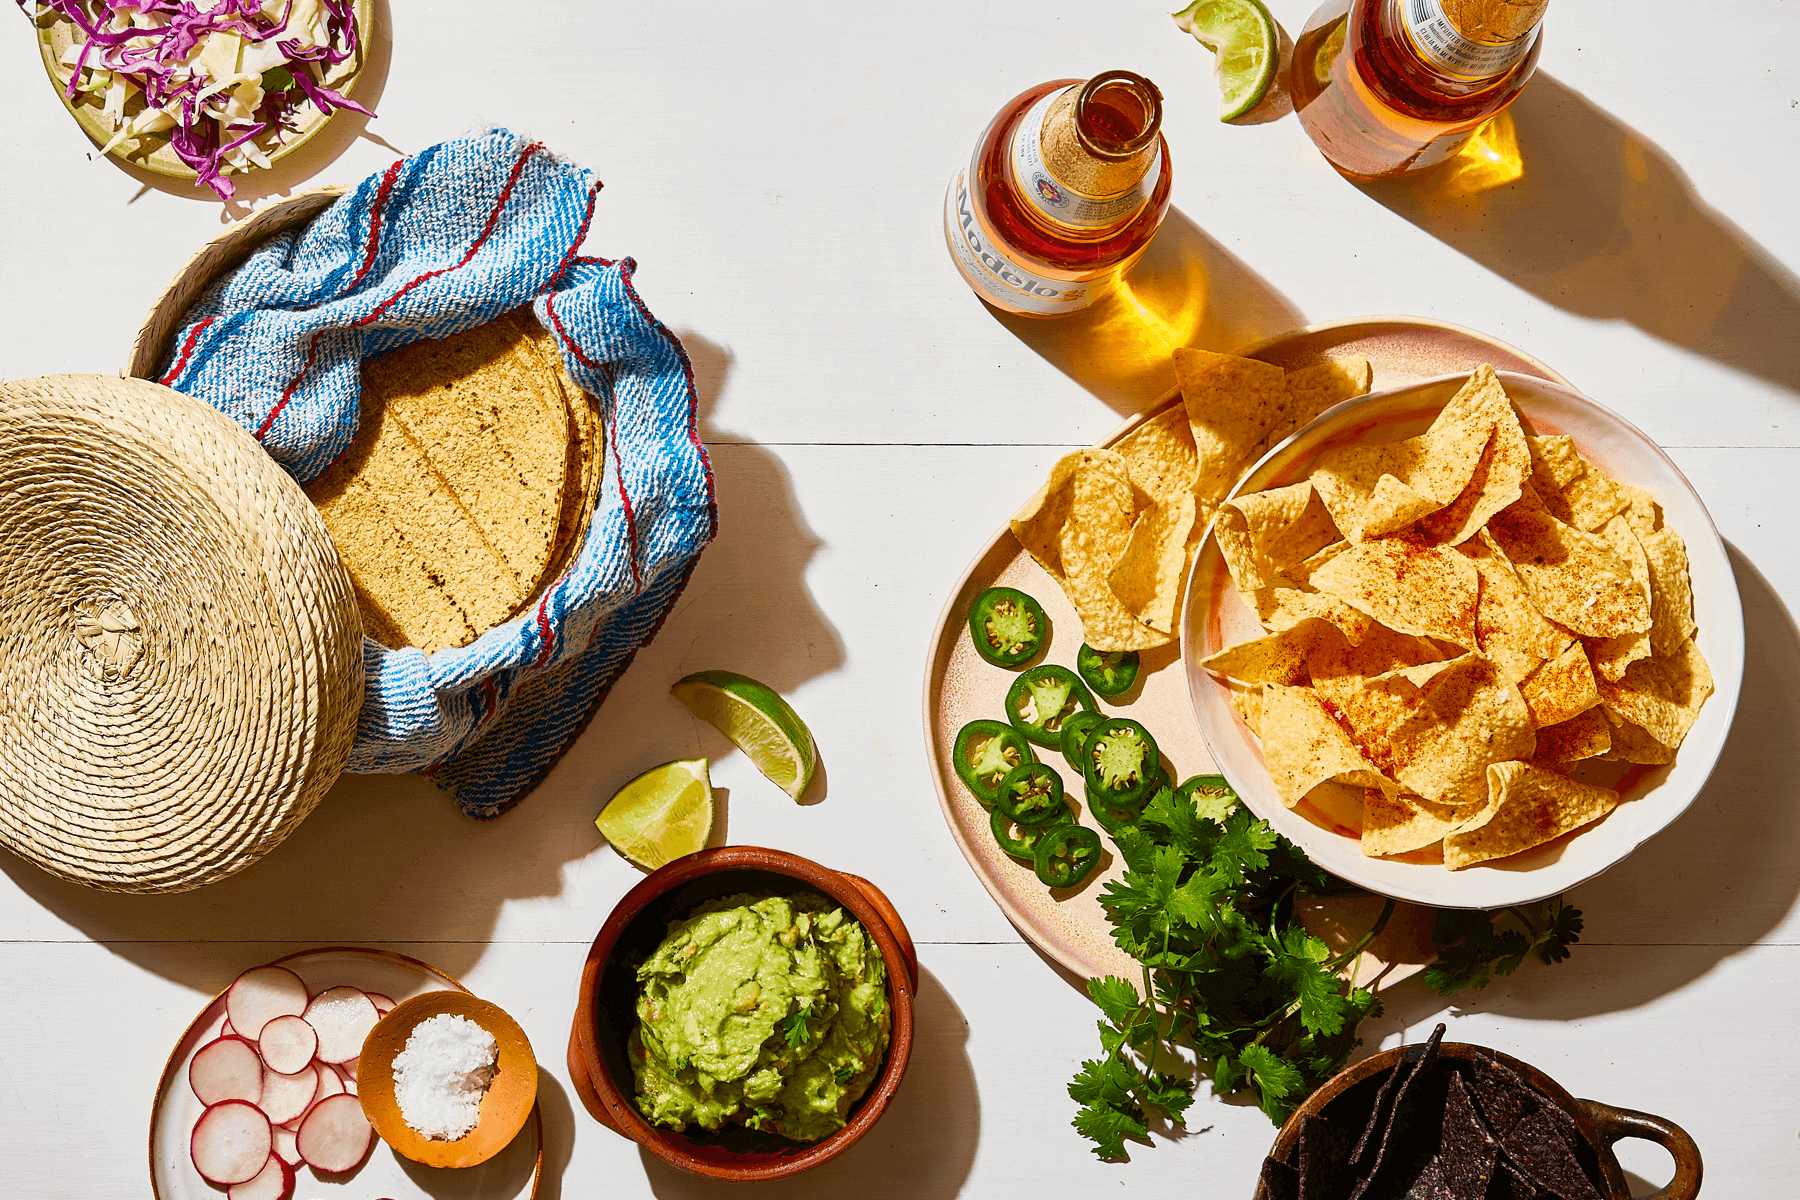 spread of Mexican finger food like tortillas, corn chips, peppers, guacamole, and beer